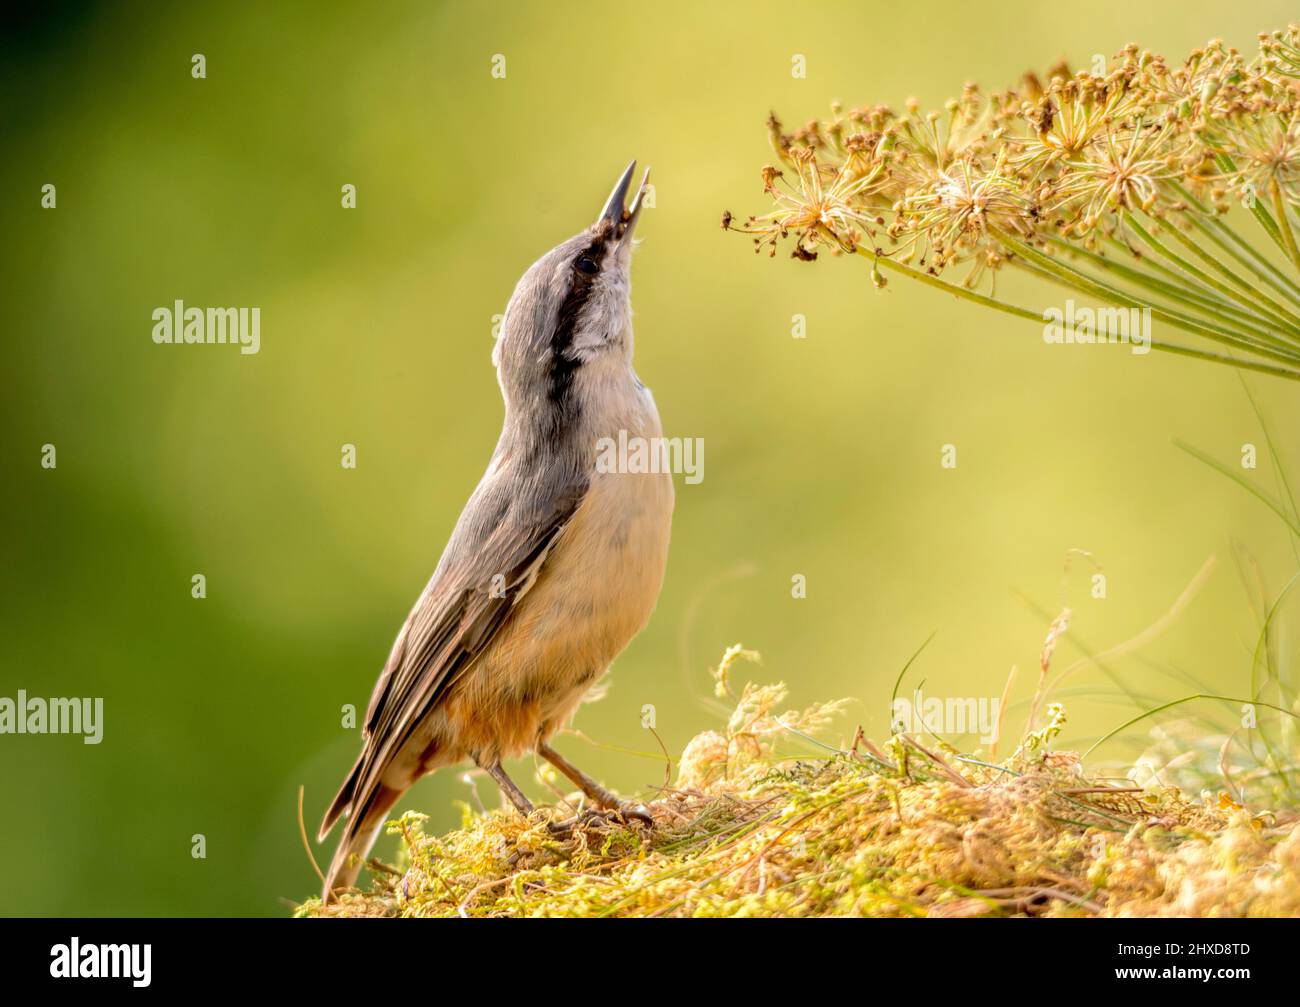 nuthatch standing on a umbellifer plant and looking up Stock Photo